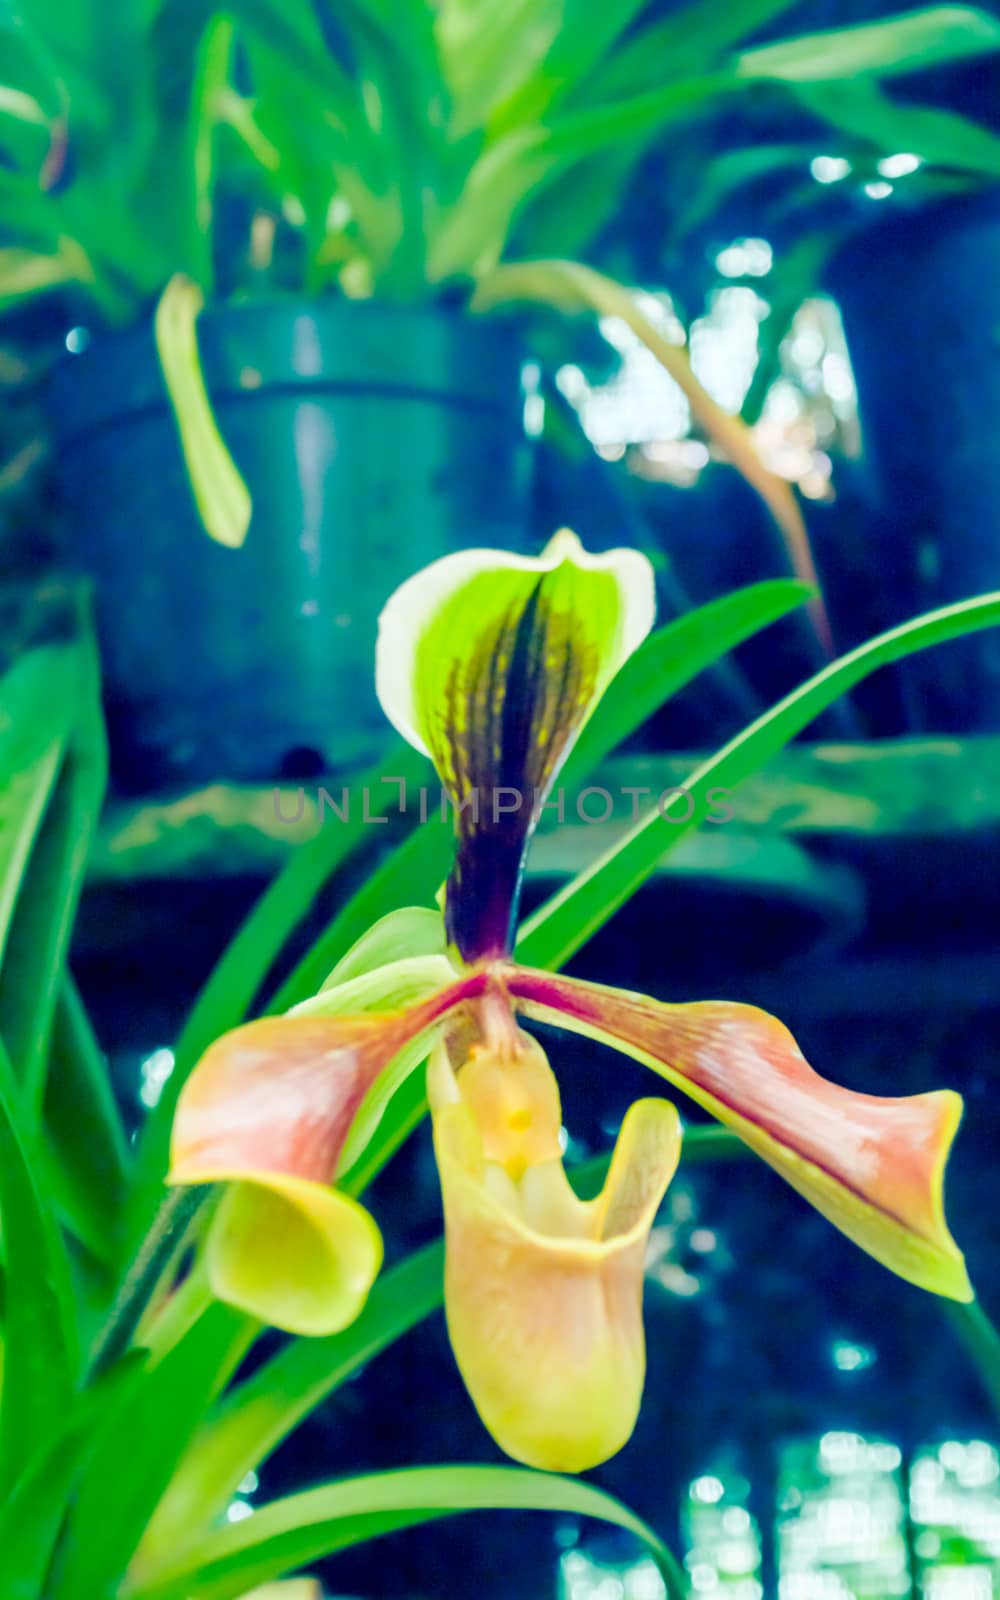 Hard-leaved Pocket Orchid (Paphiopedilum micranthum) commonly known as the Silver Slipper Orchid or Pocket Orchid. It blooms during late winter to early summer with one flower per inflorescence. by sudiptabhowmick